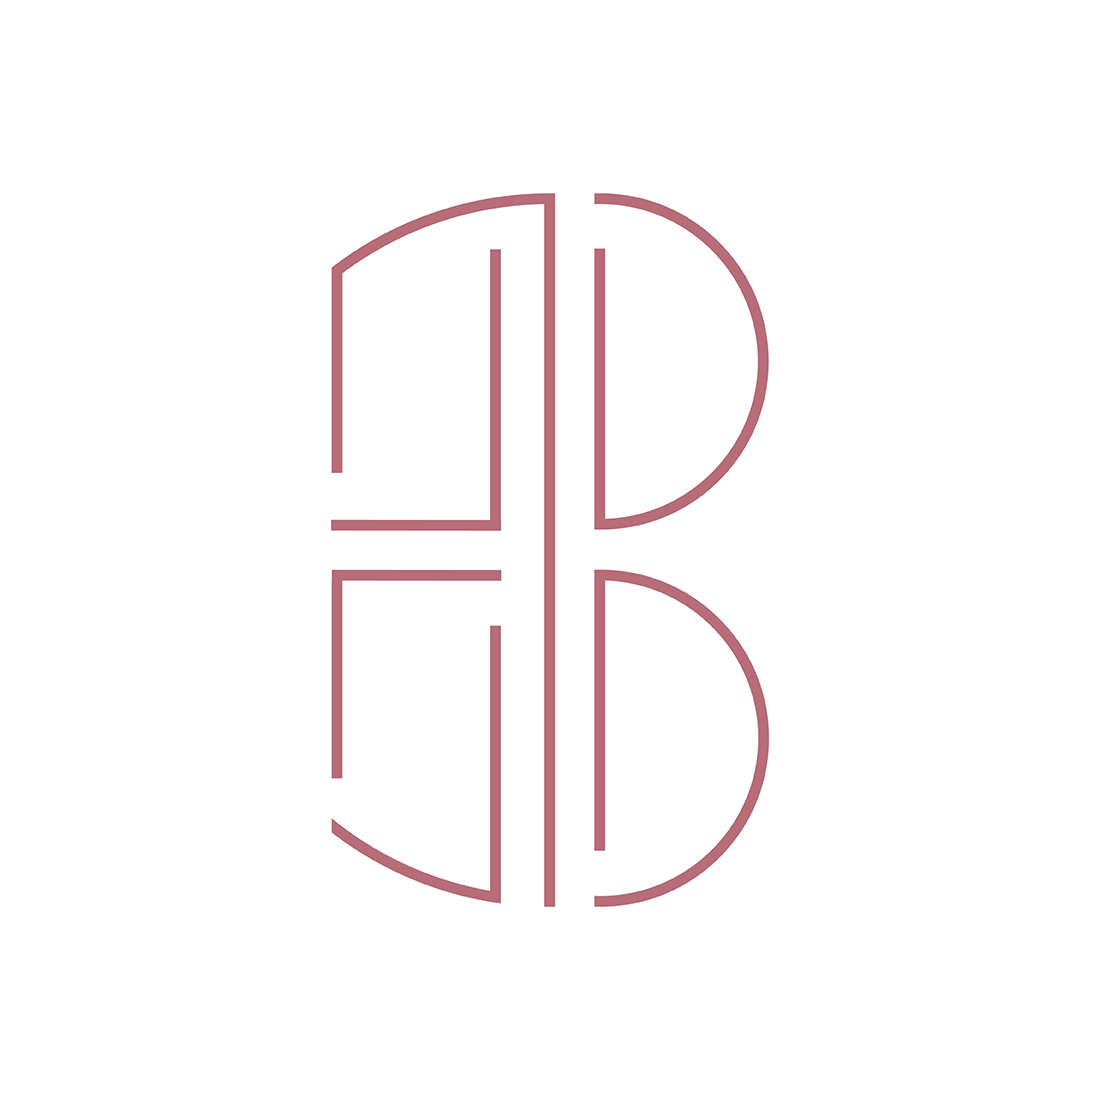 Pair of Letters HB logo cover image.